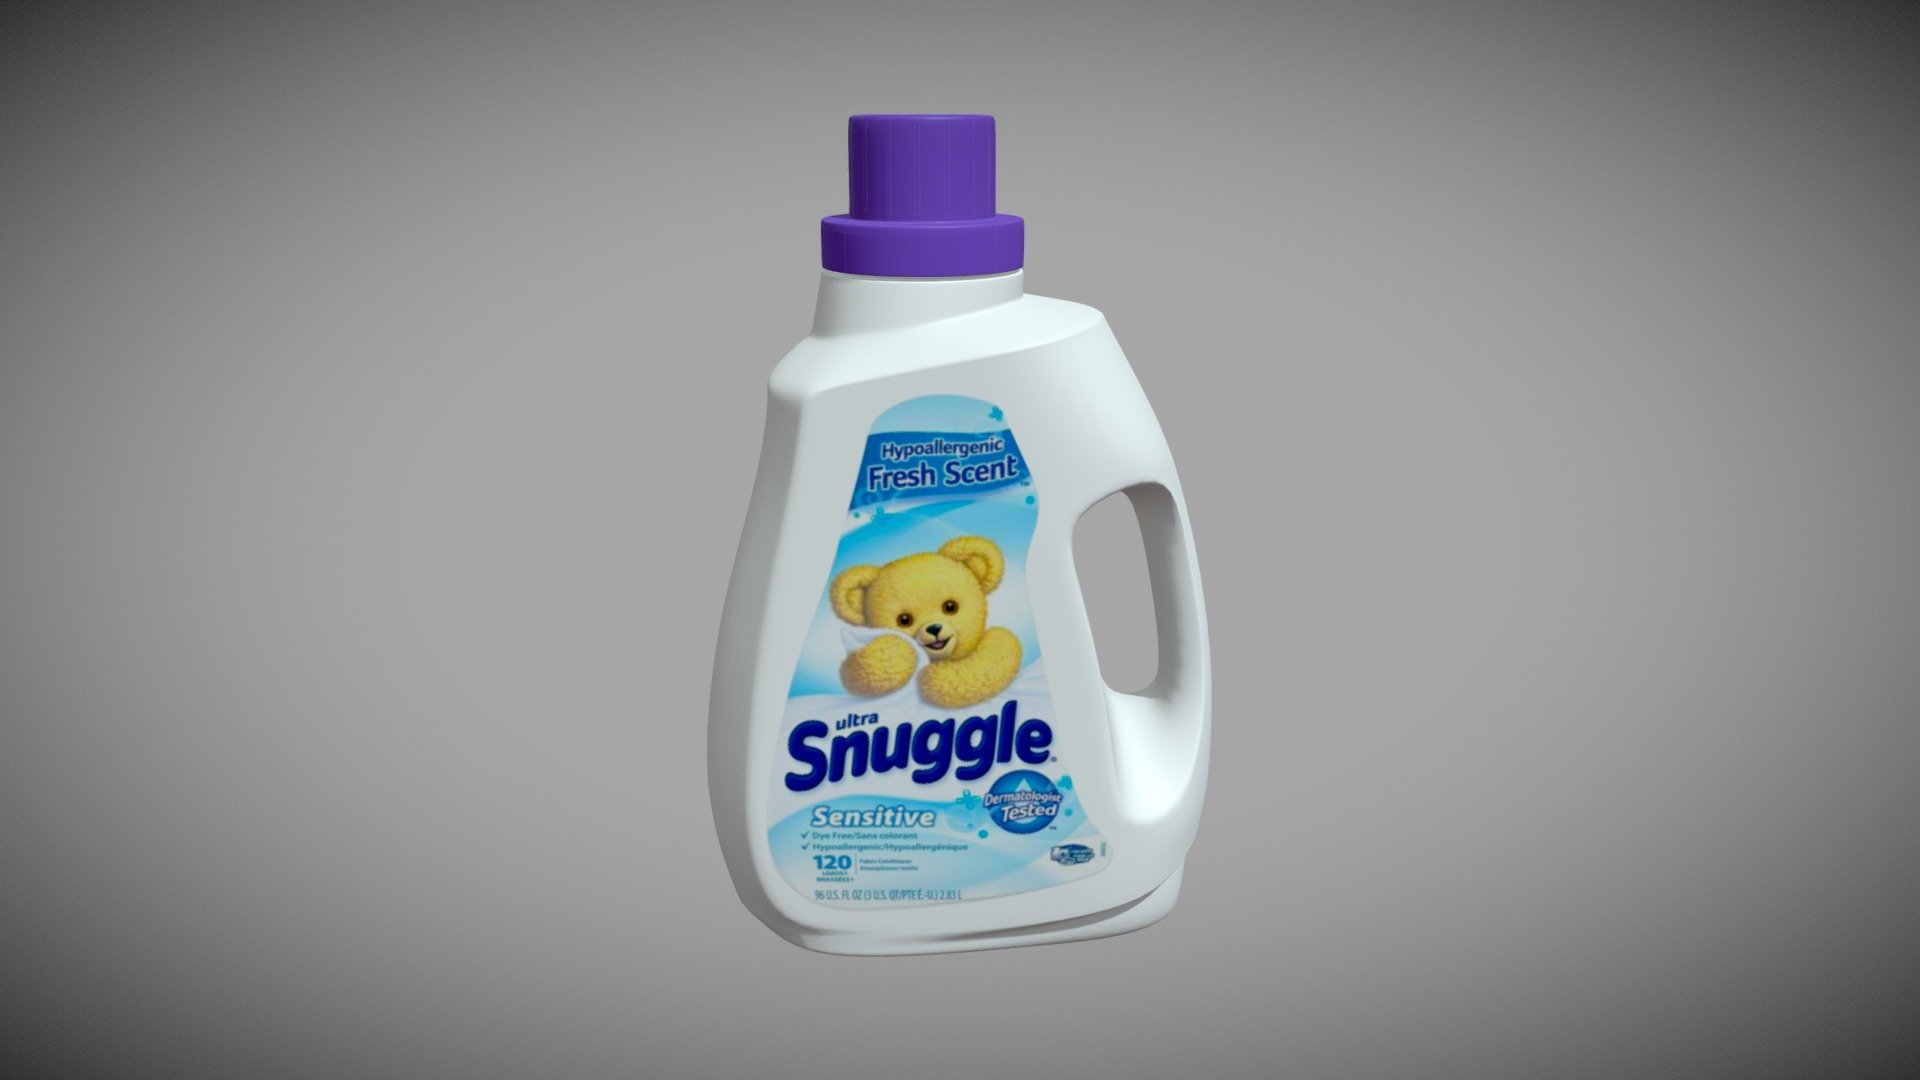 Detailed model of a snuggle detergent bottle modeled in Cinema 4D.The model was created using approximate real world dimensions.

The model has 25,160 polys and 25,201 vertices.

An additional file has been provided containing the original Cinema 4D project file, textures and other 3d export files such as 3ds, fbx, obj and stl 3d model